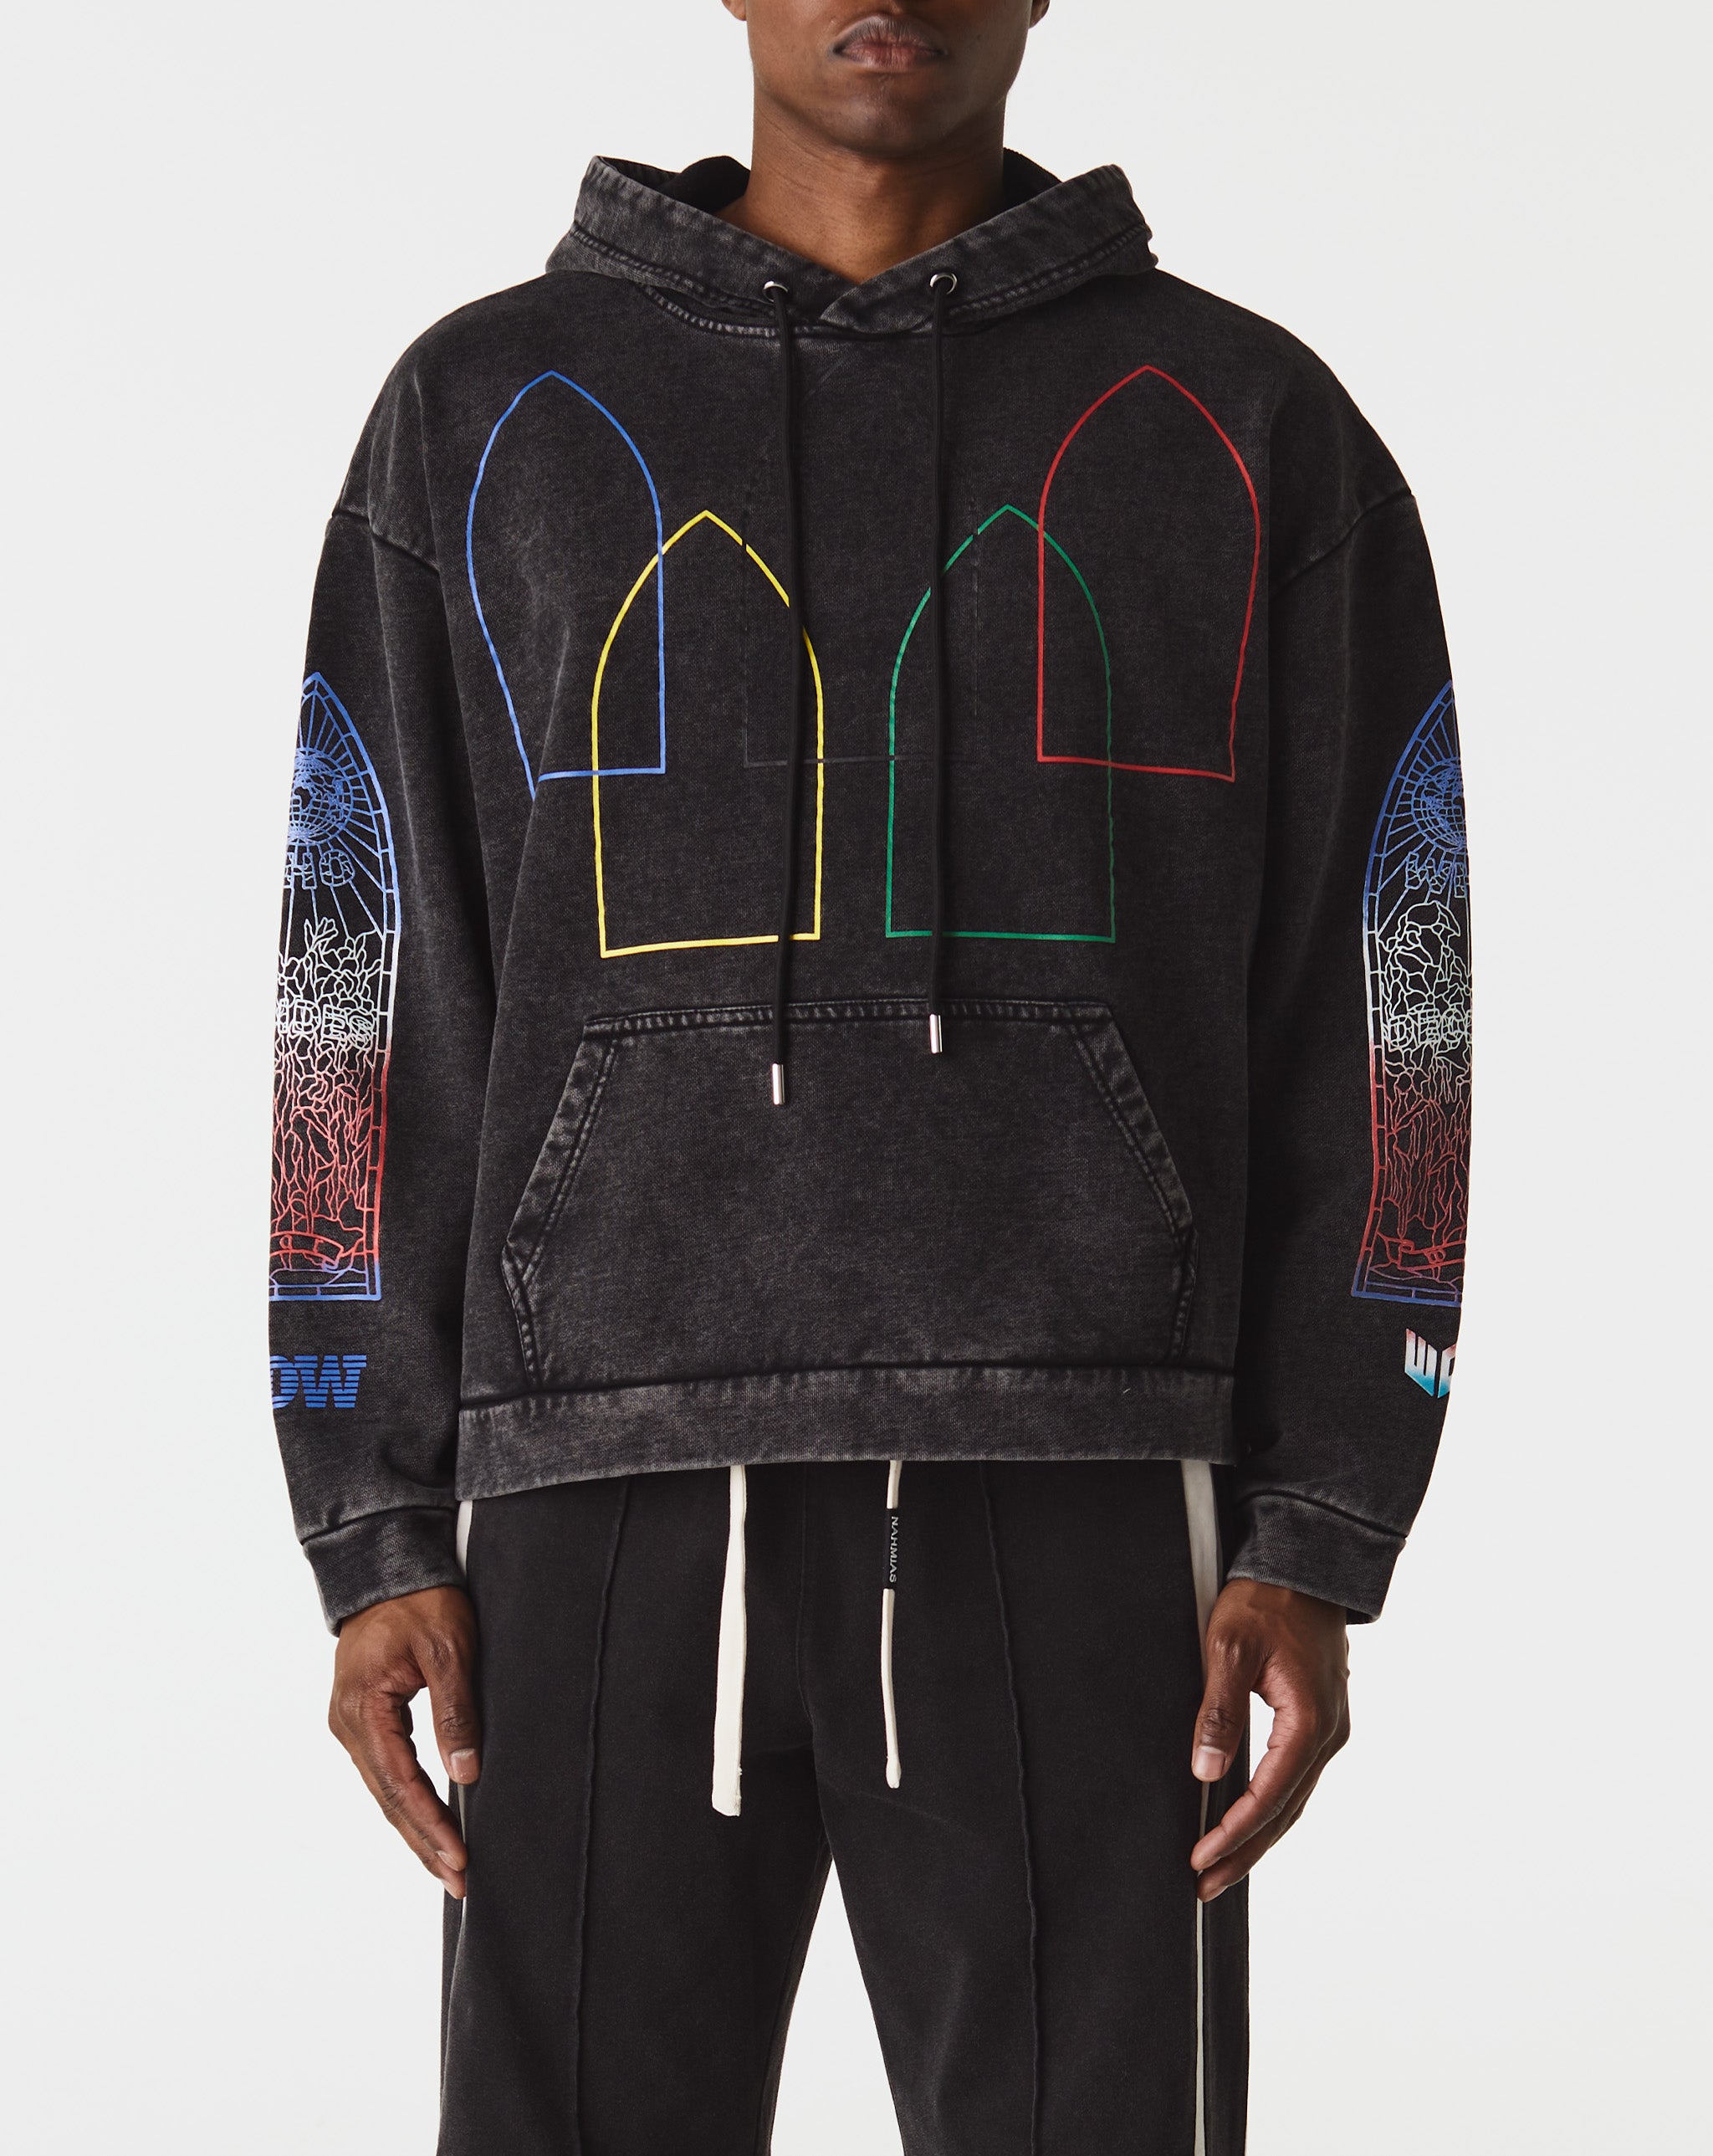 Who Decides War Intertwined Windows Hoodie  - Cheap Atelier-lumieres Jordan outlet